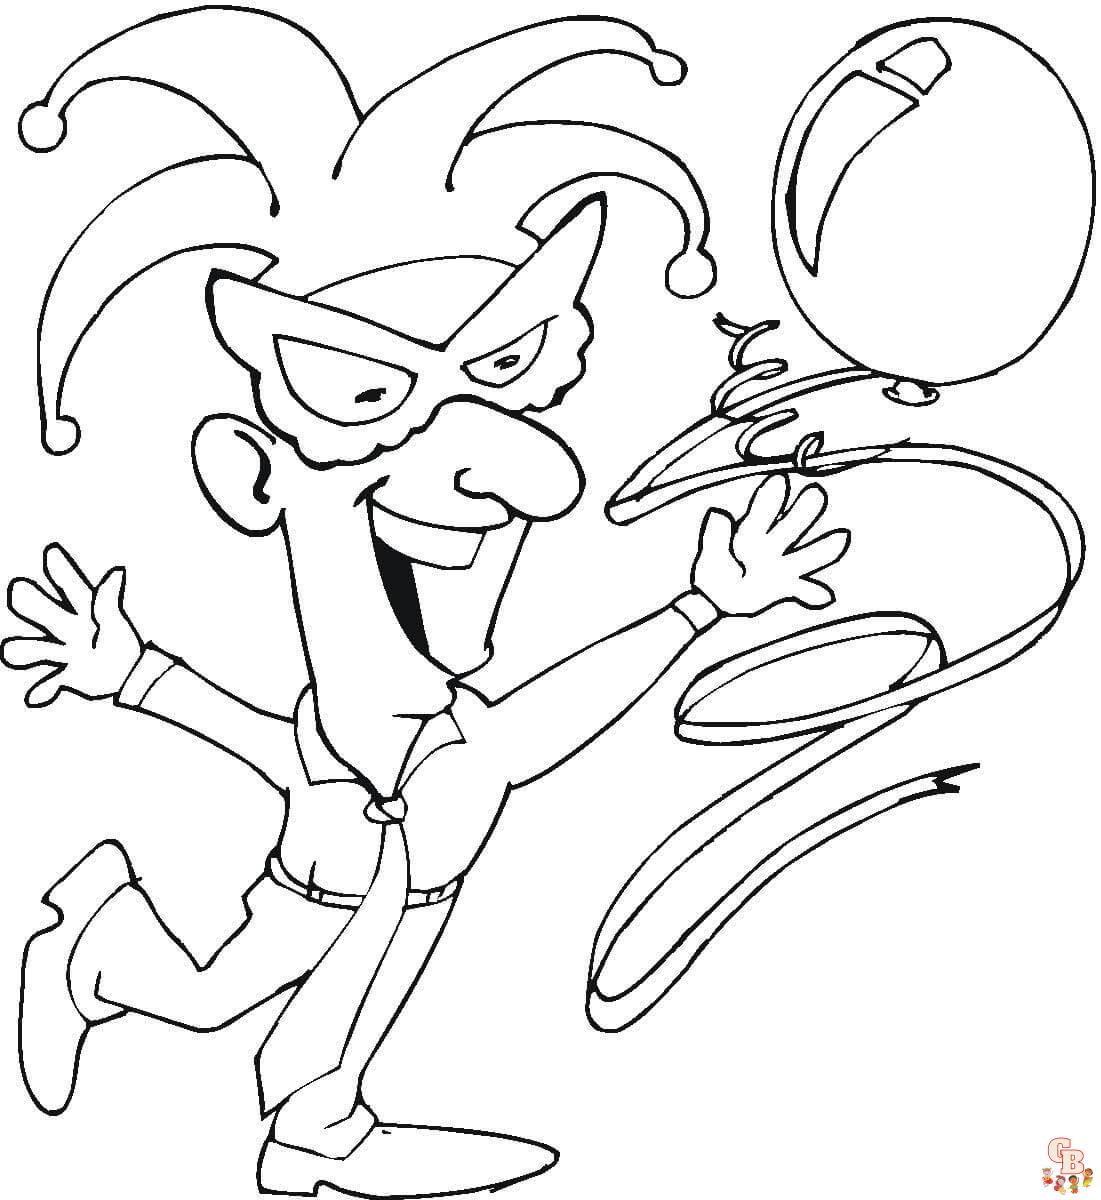 Mardi Gras coloring pages 18